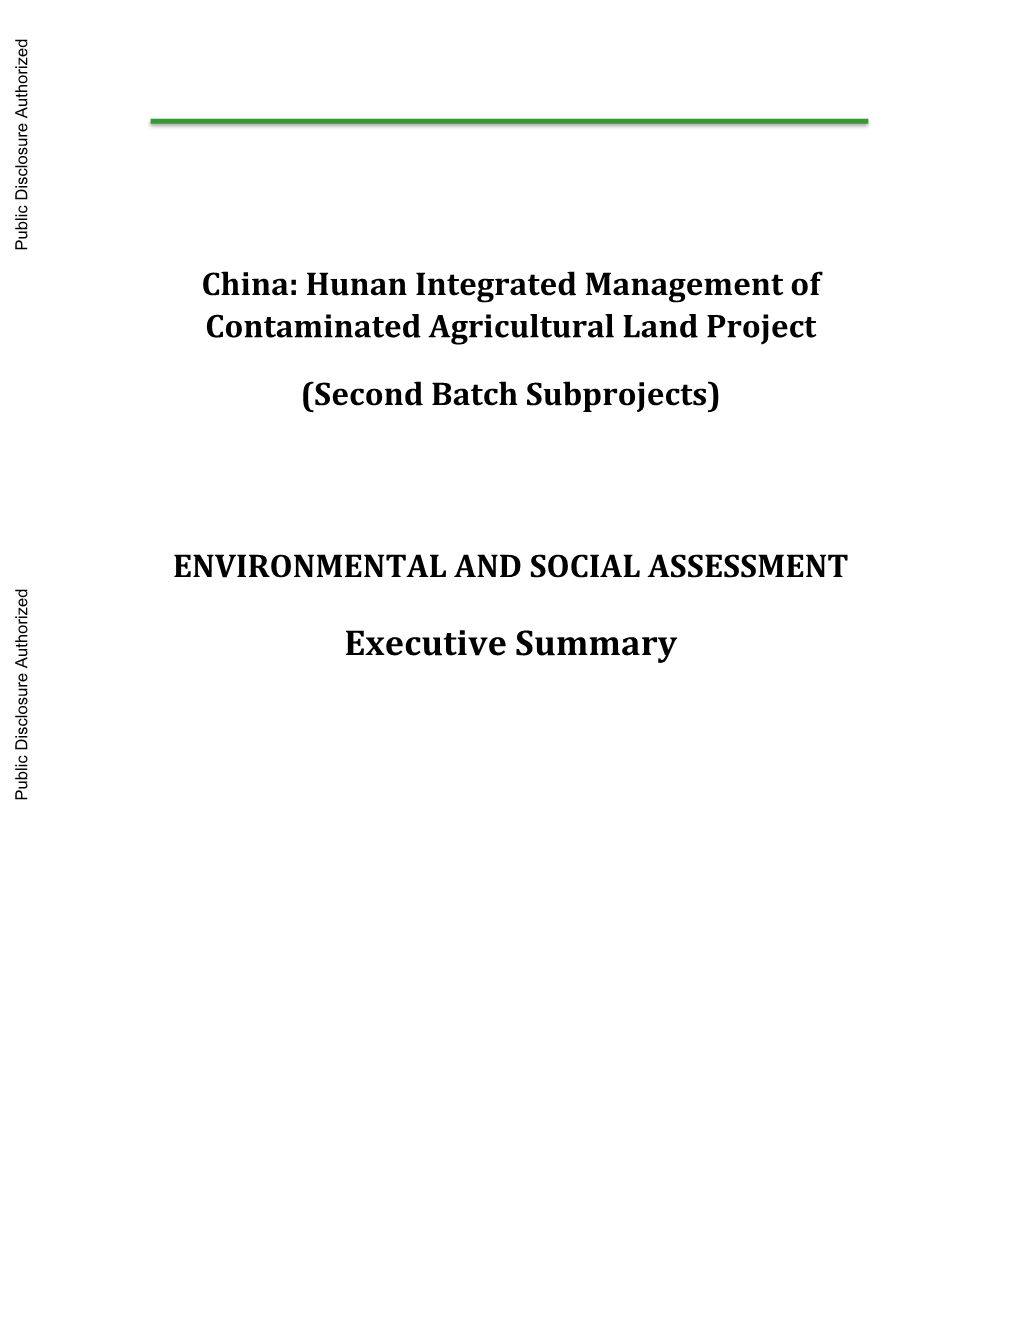 China: Hunan Integrated Management of Contaminated Agricultural Land Project